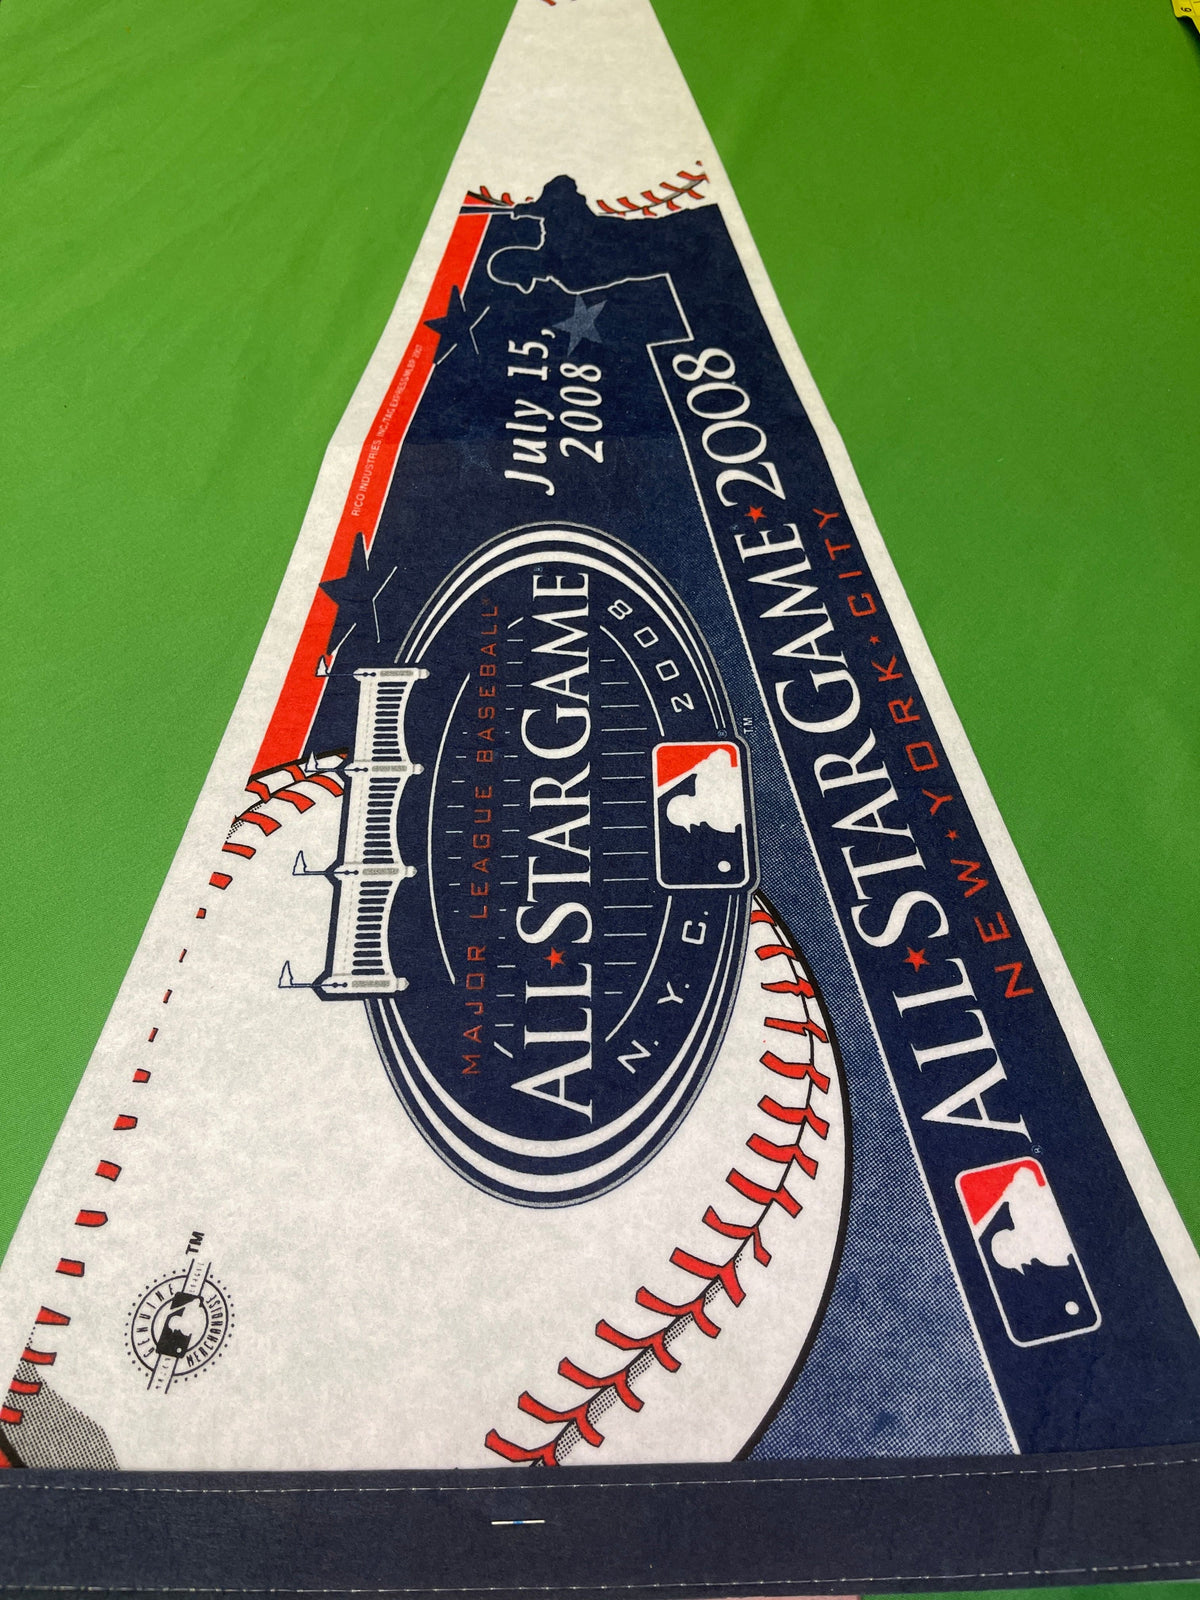 MLB All Star Game NYC 2008 Full-Size Pennant NWT